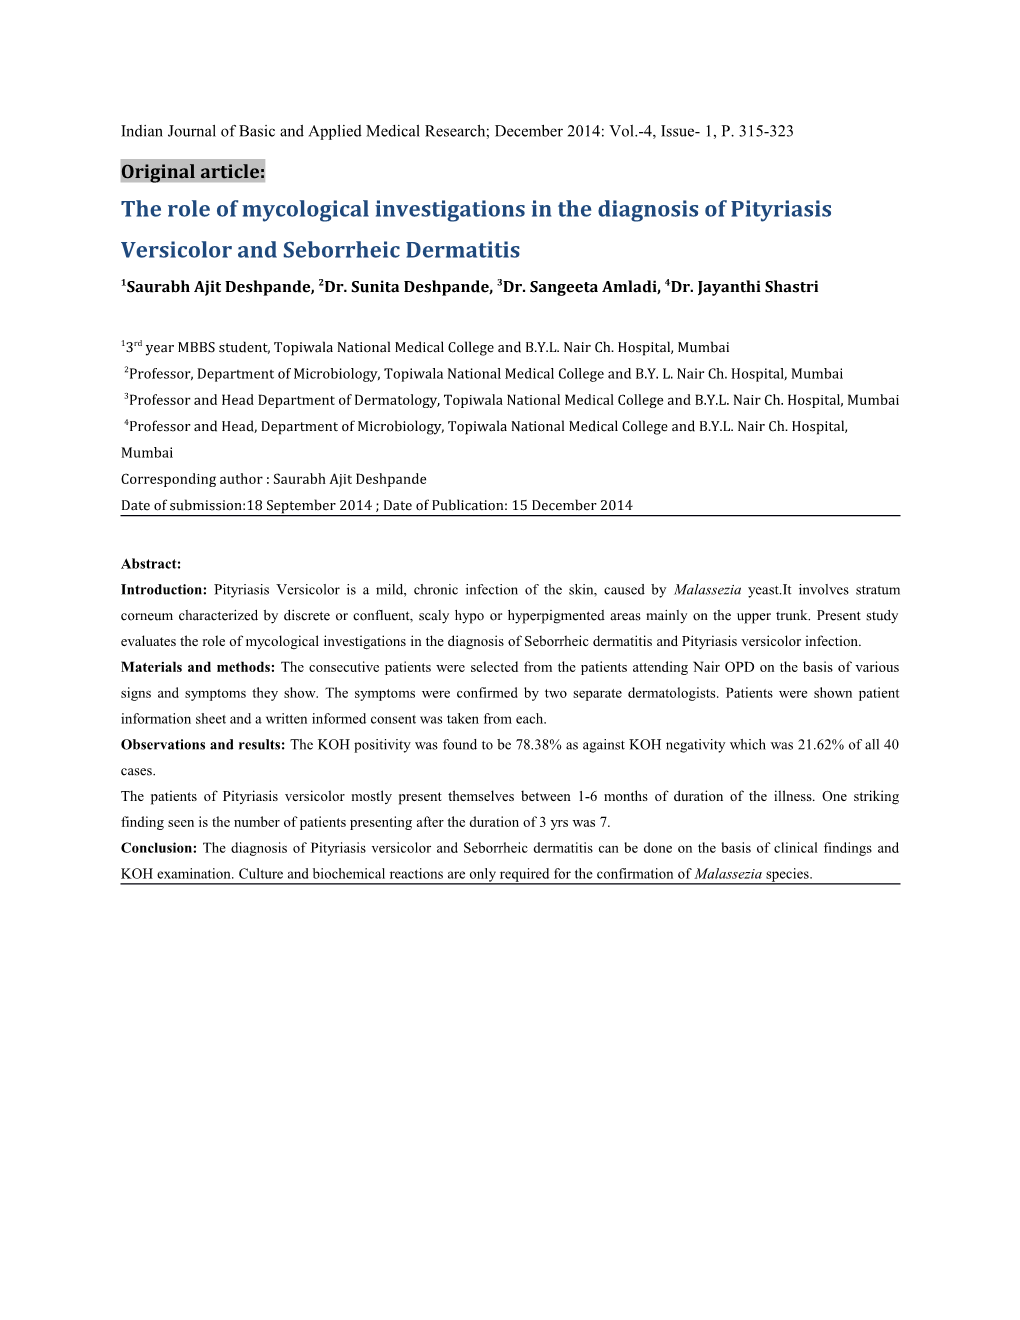 The Role of Mycological Investigations in the Diagnosis of Pityriasisversicolor and Seborrheic